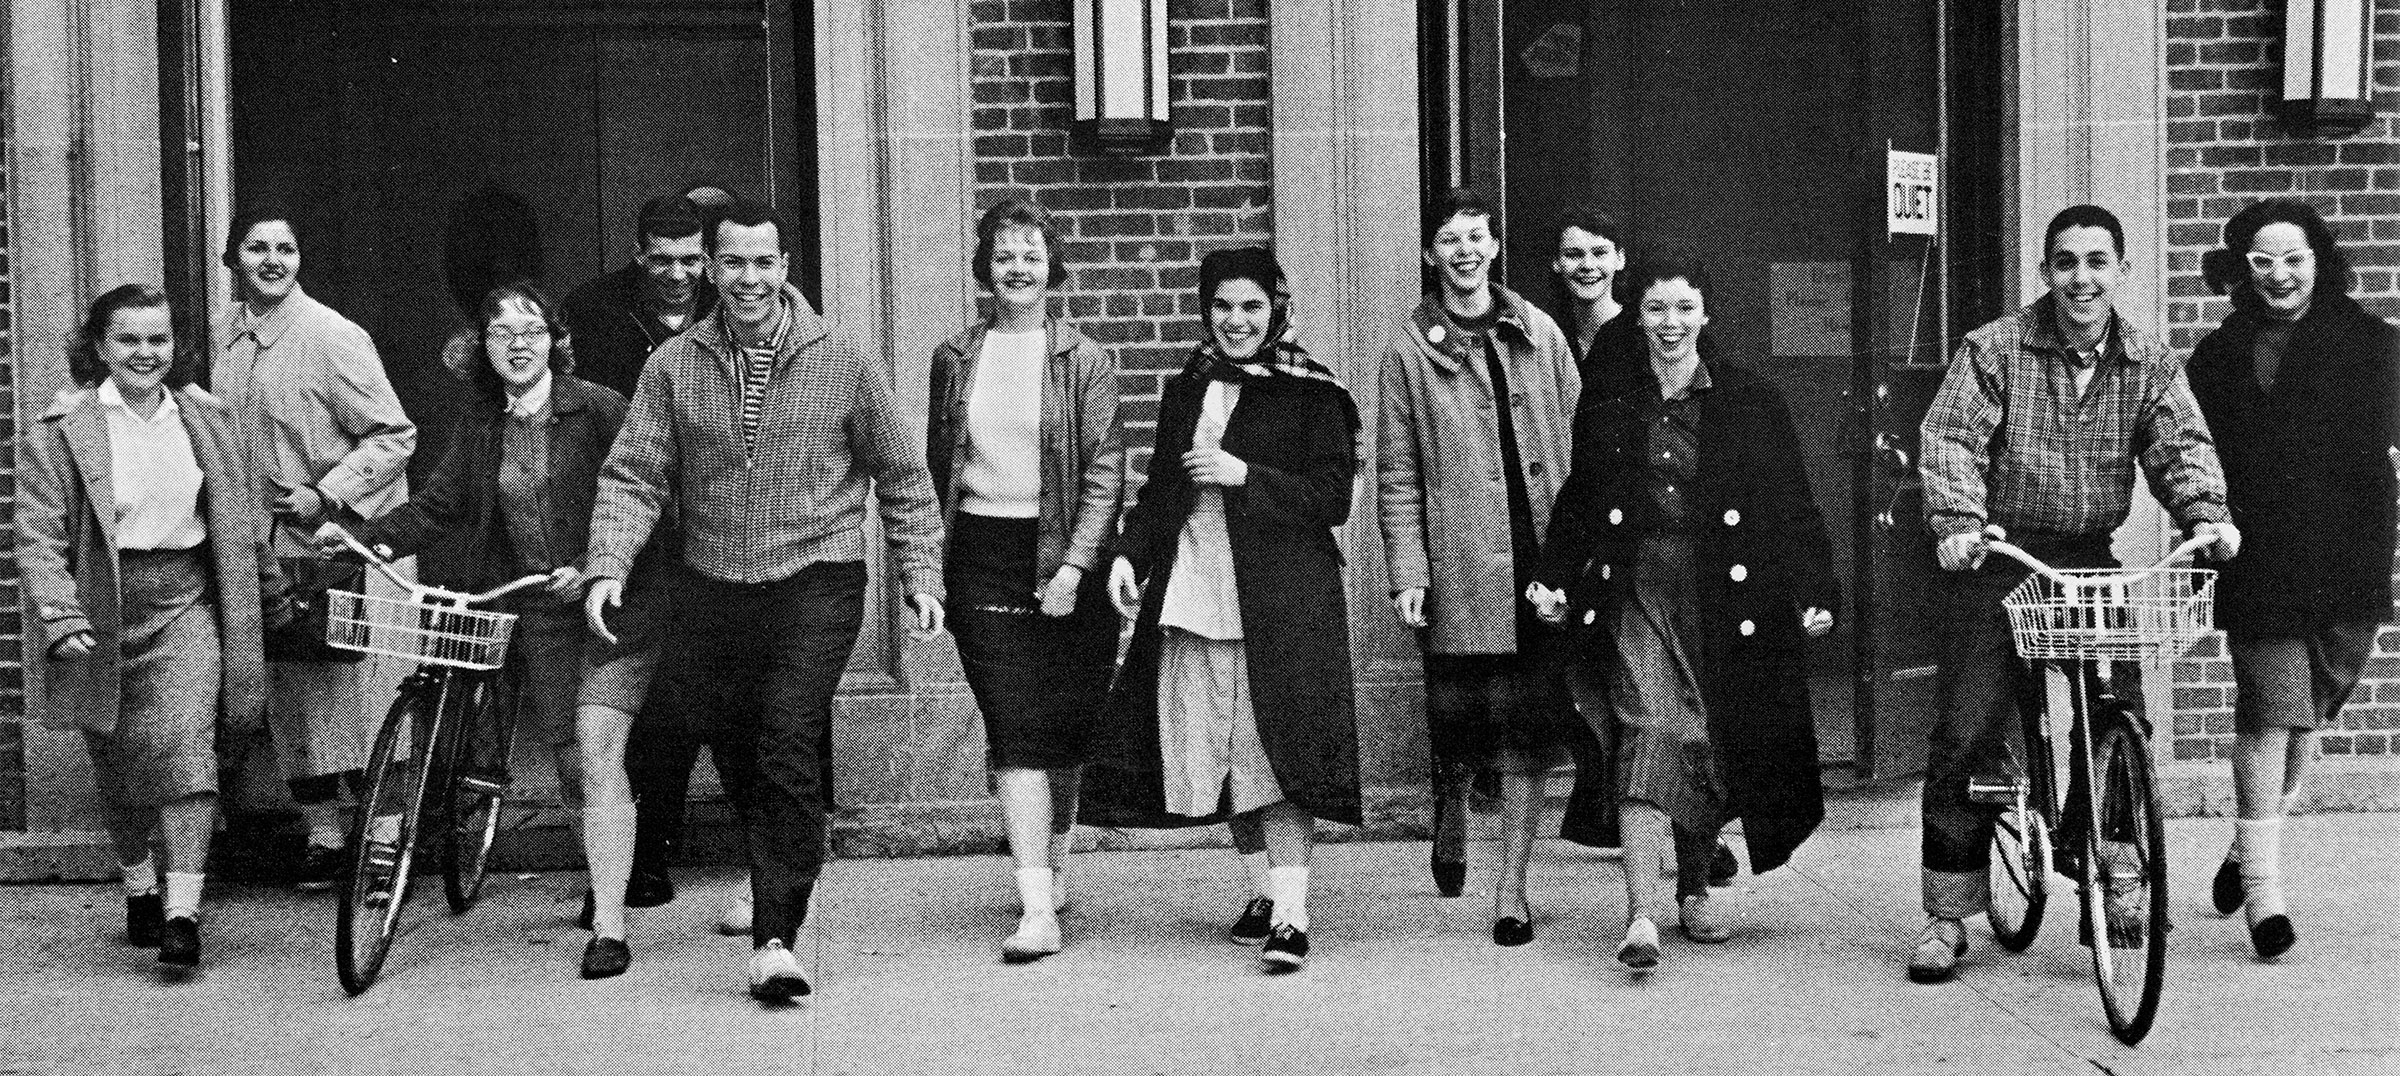 group of students from the 50s